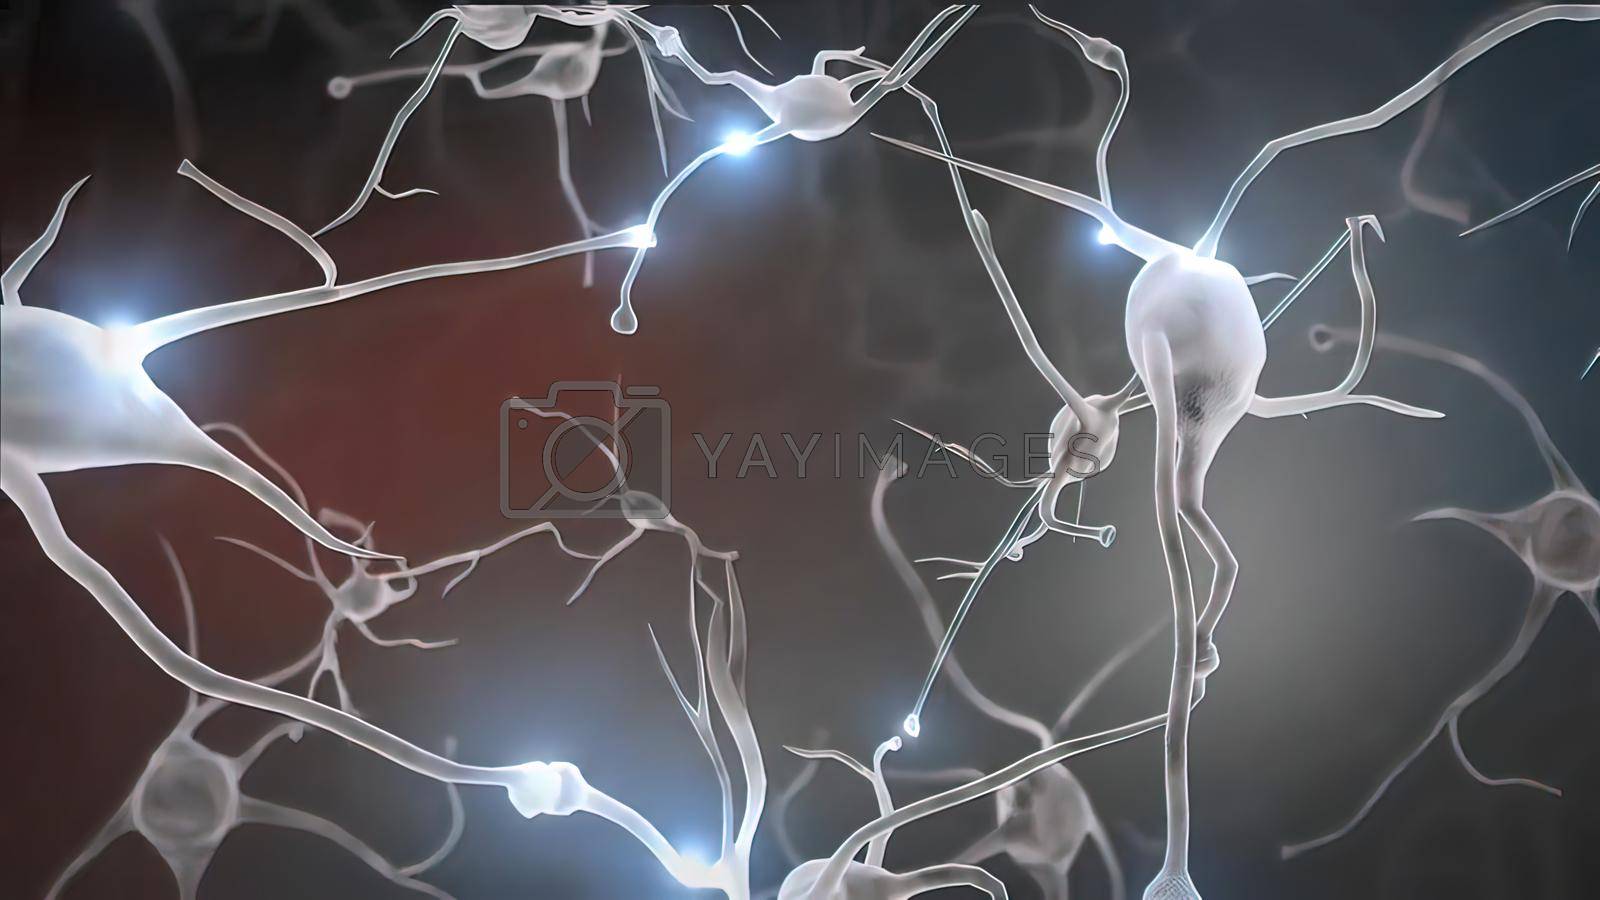 Royalty free image of Neuron and synapses medical illustration. by creativepic